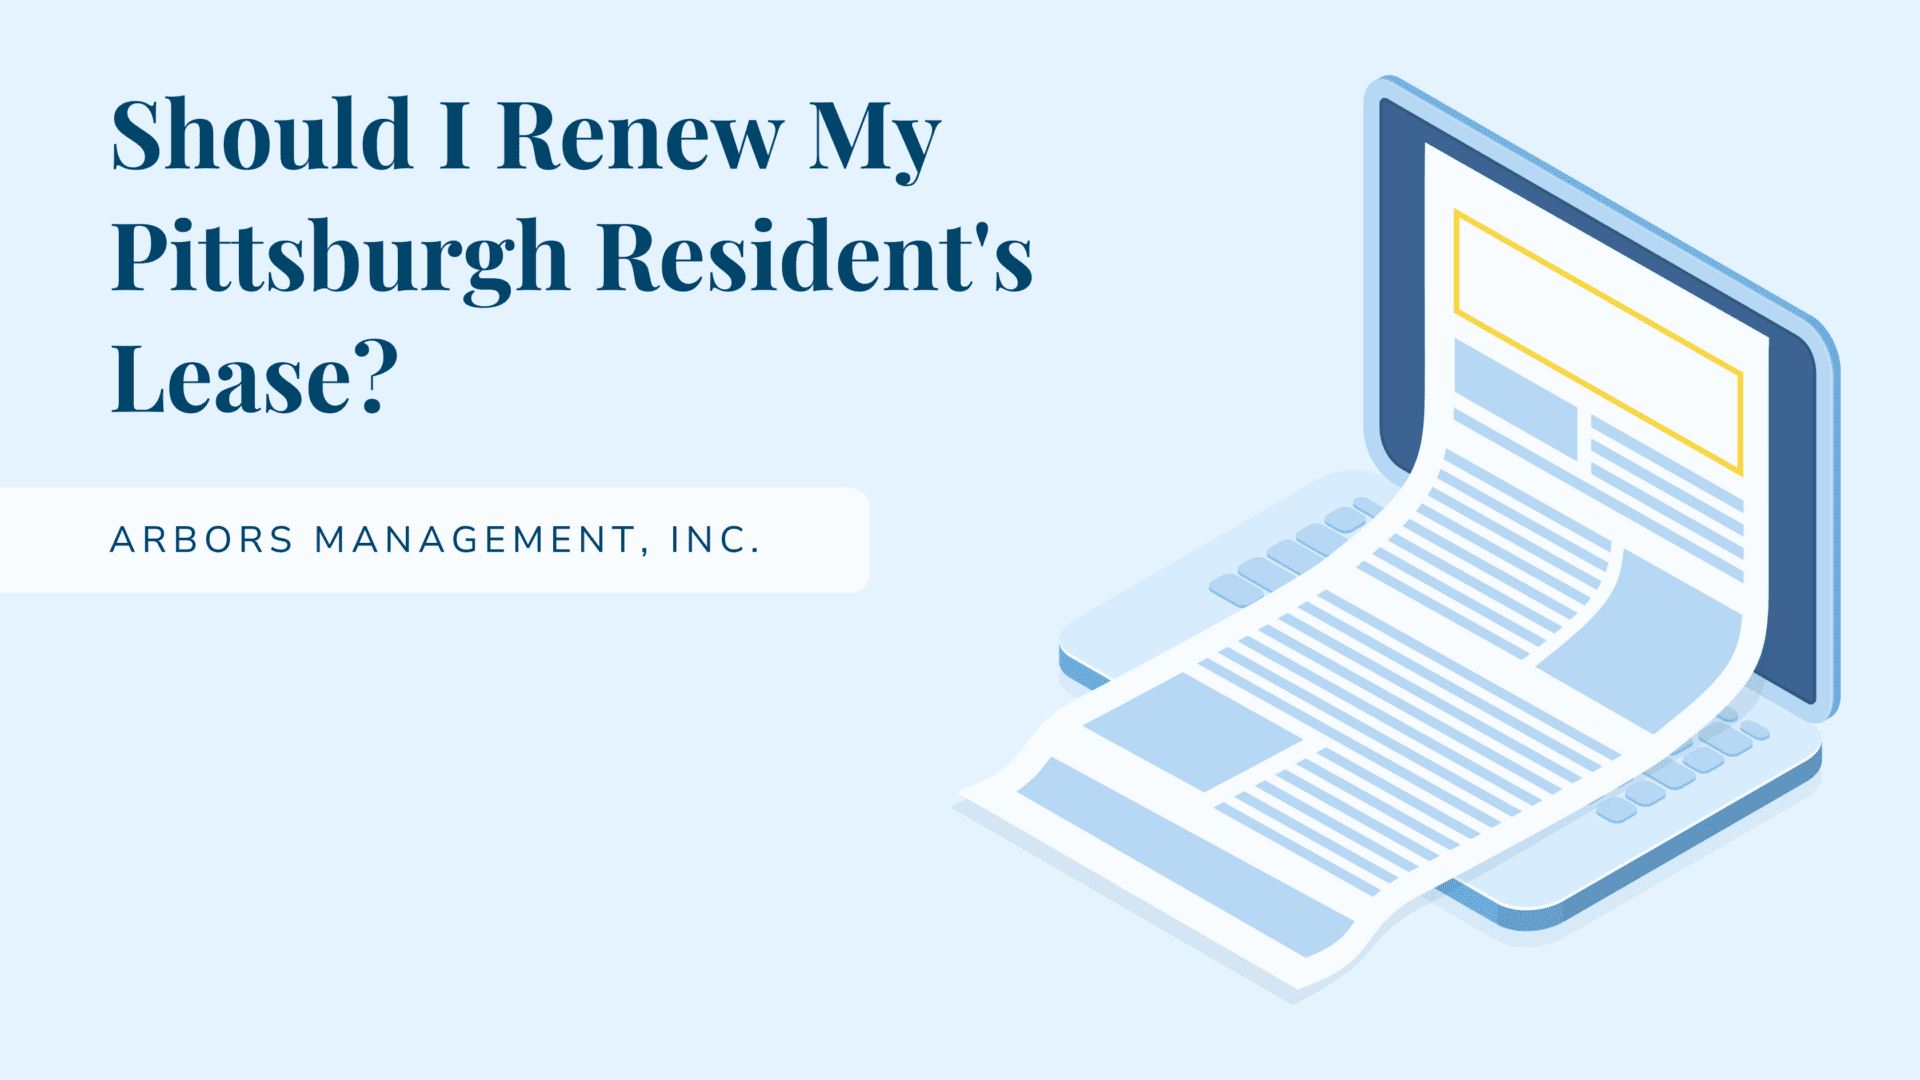 Should I Renew My Pittsburgh Resident’s Lease?